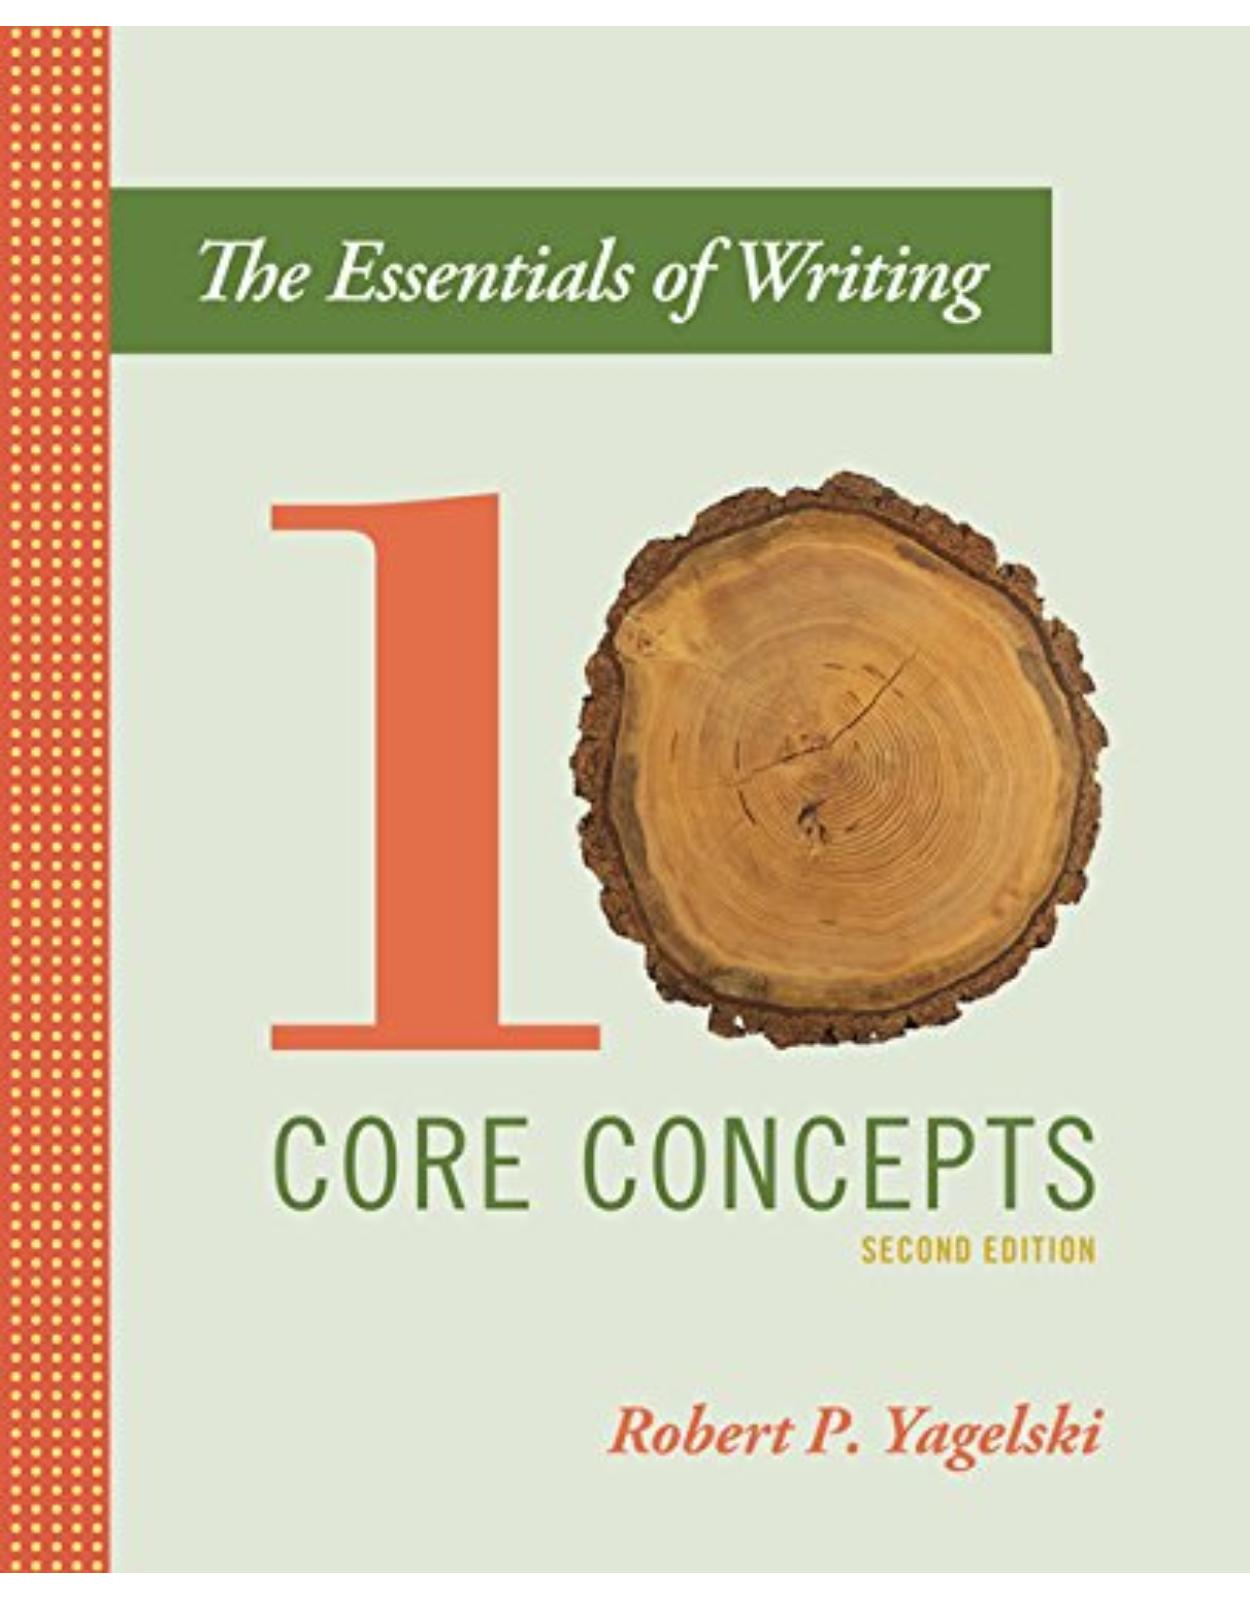 The Essentials of Writing: Ten Core Concepts